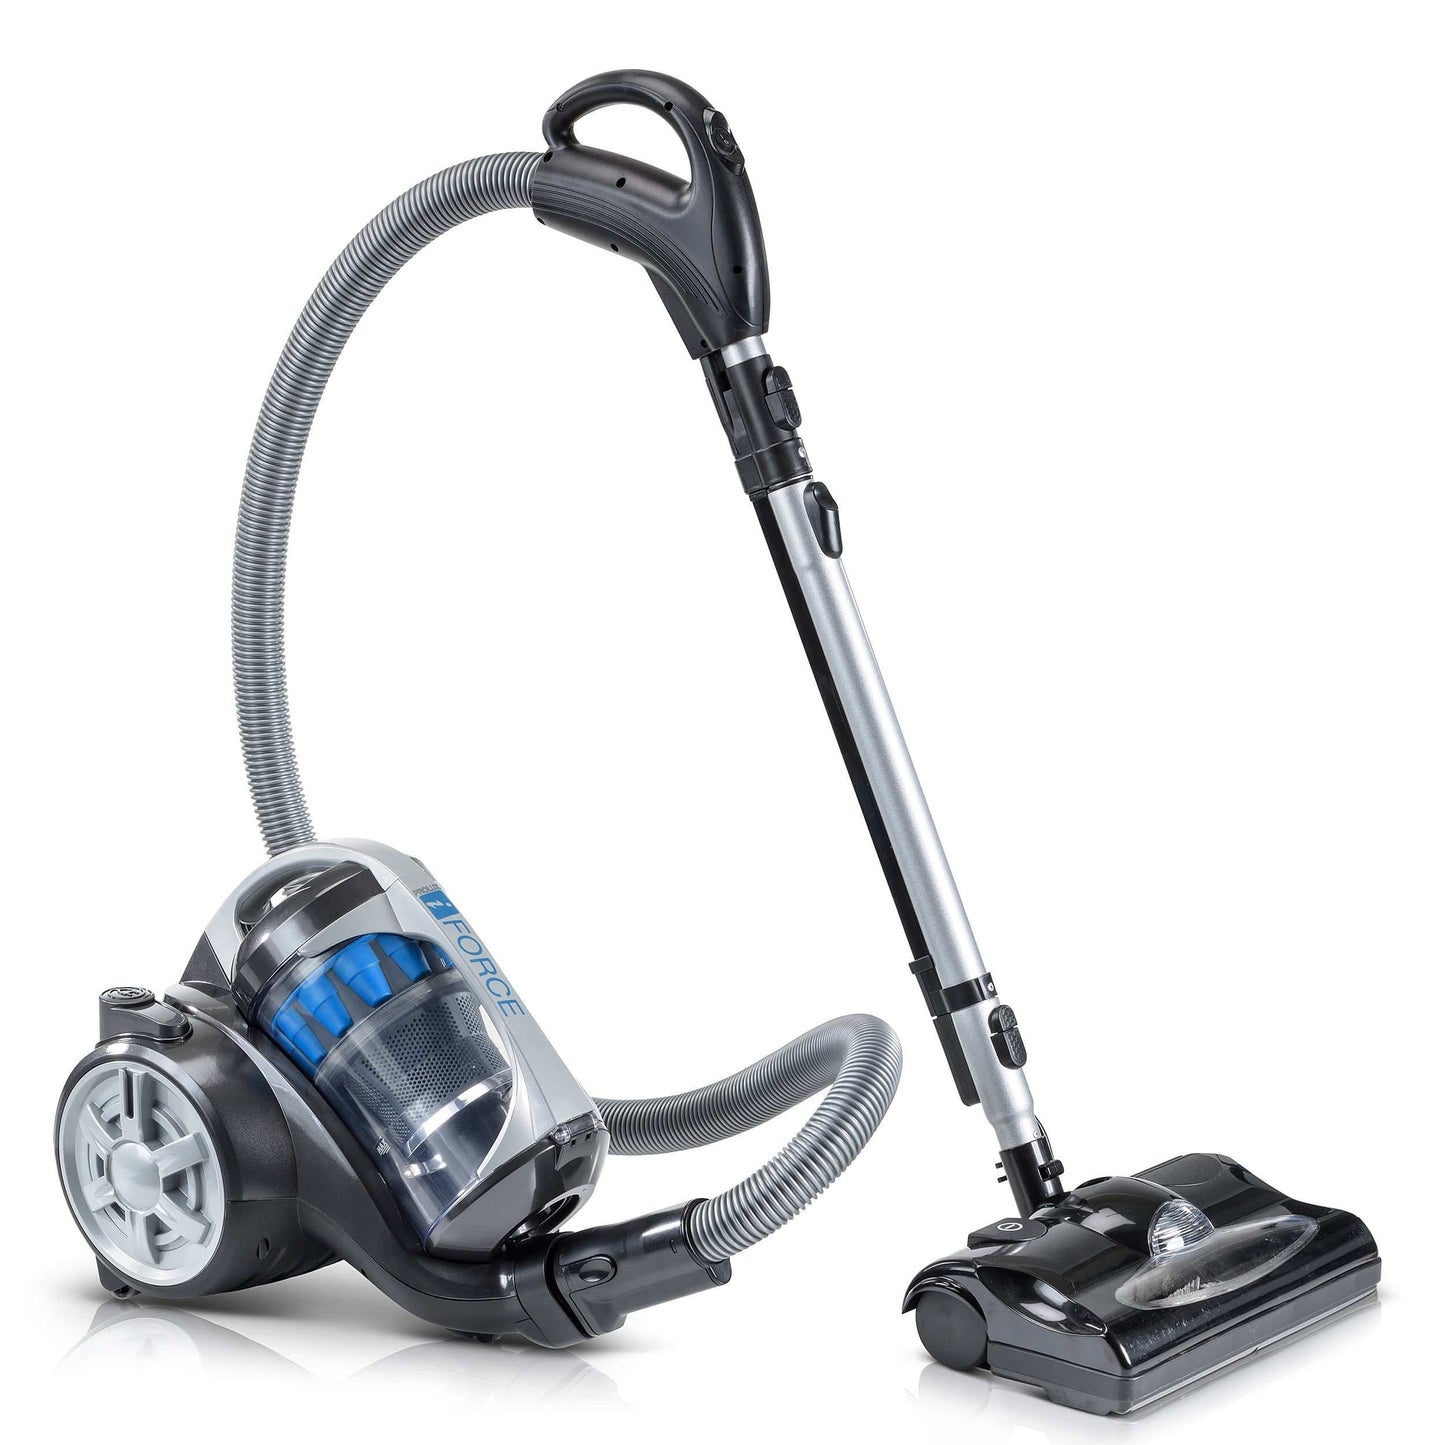 2019 Prolux iFORCE Bagless Canister Vacuum Cleaner With 2 Stage Hepa Filtration & Power Nozzle